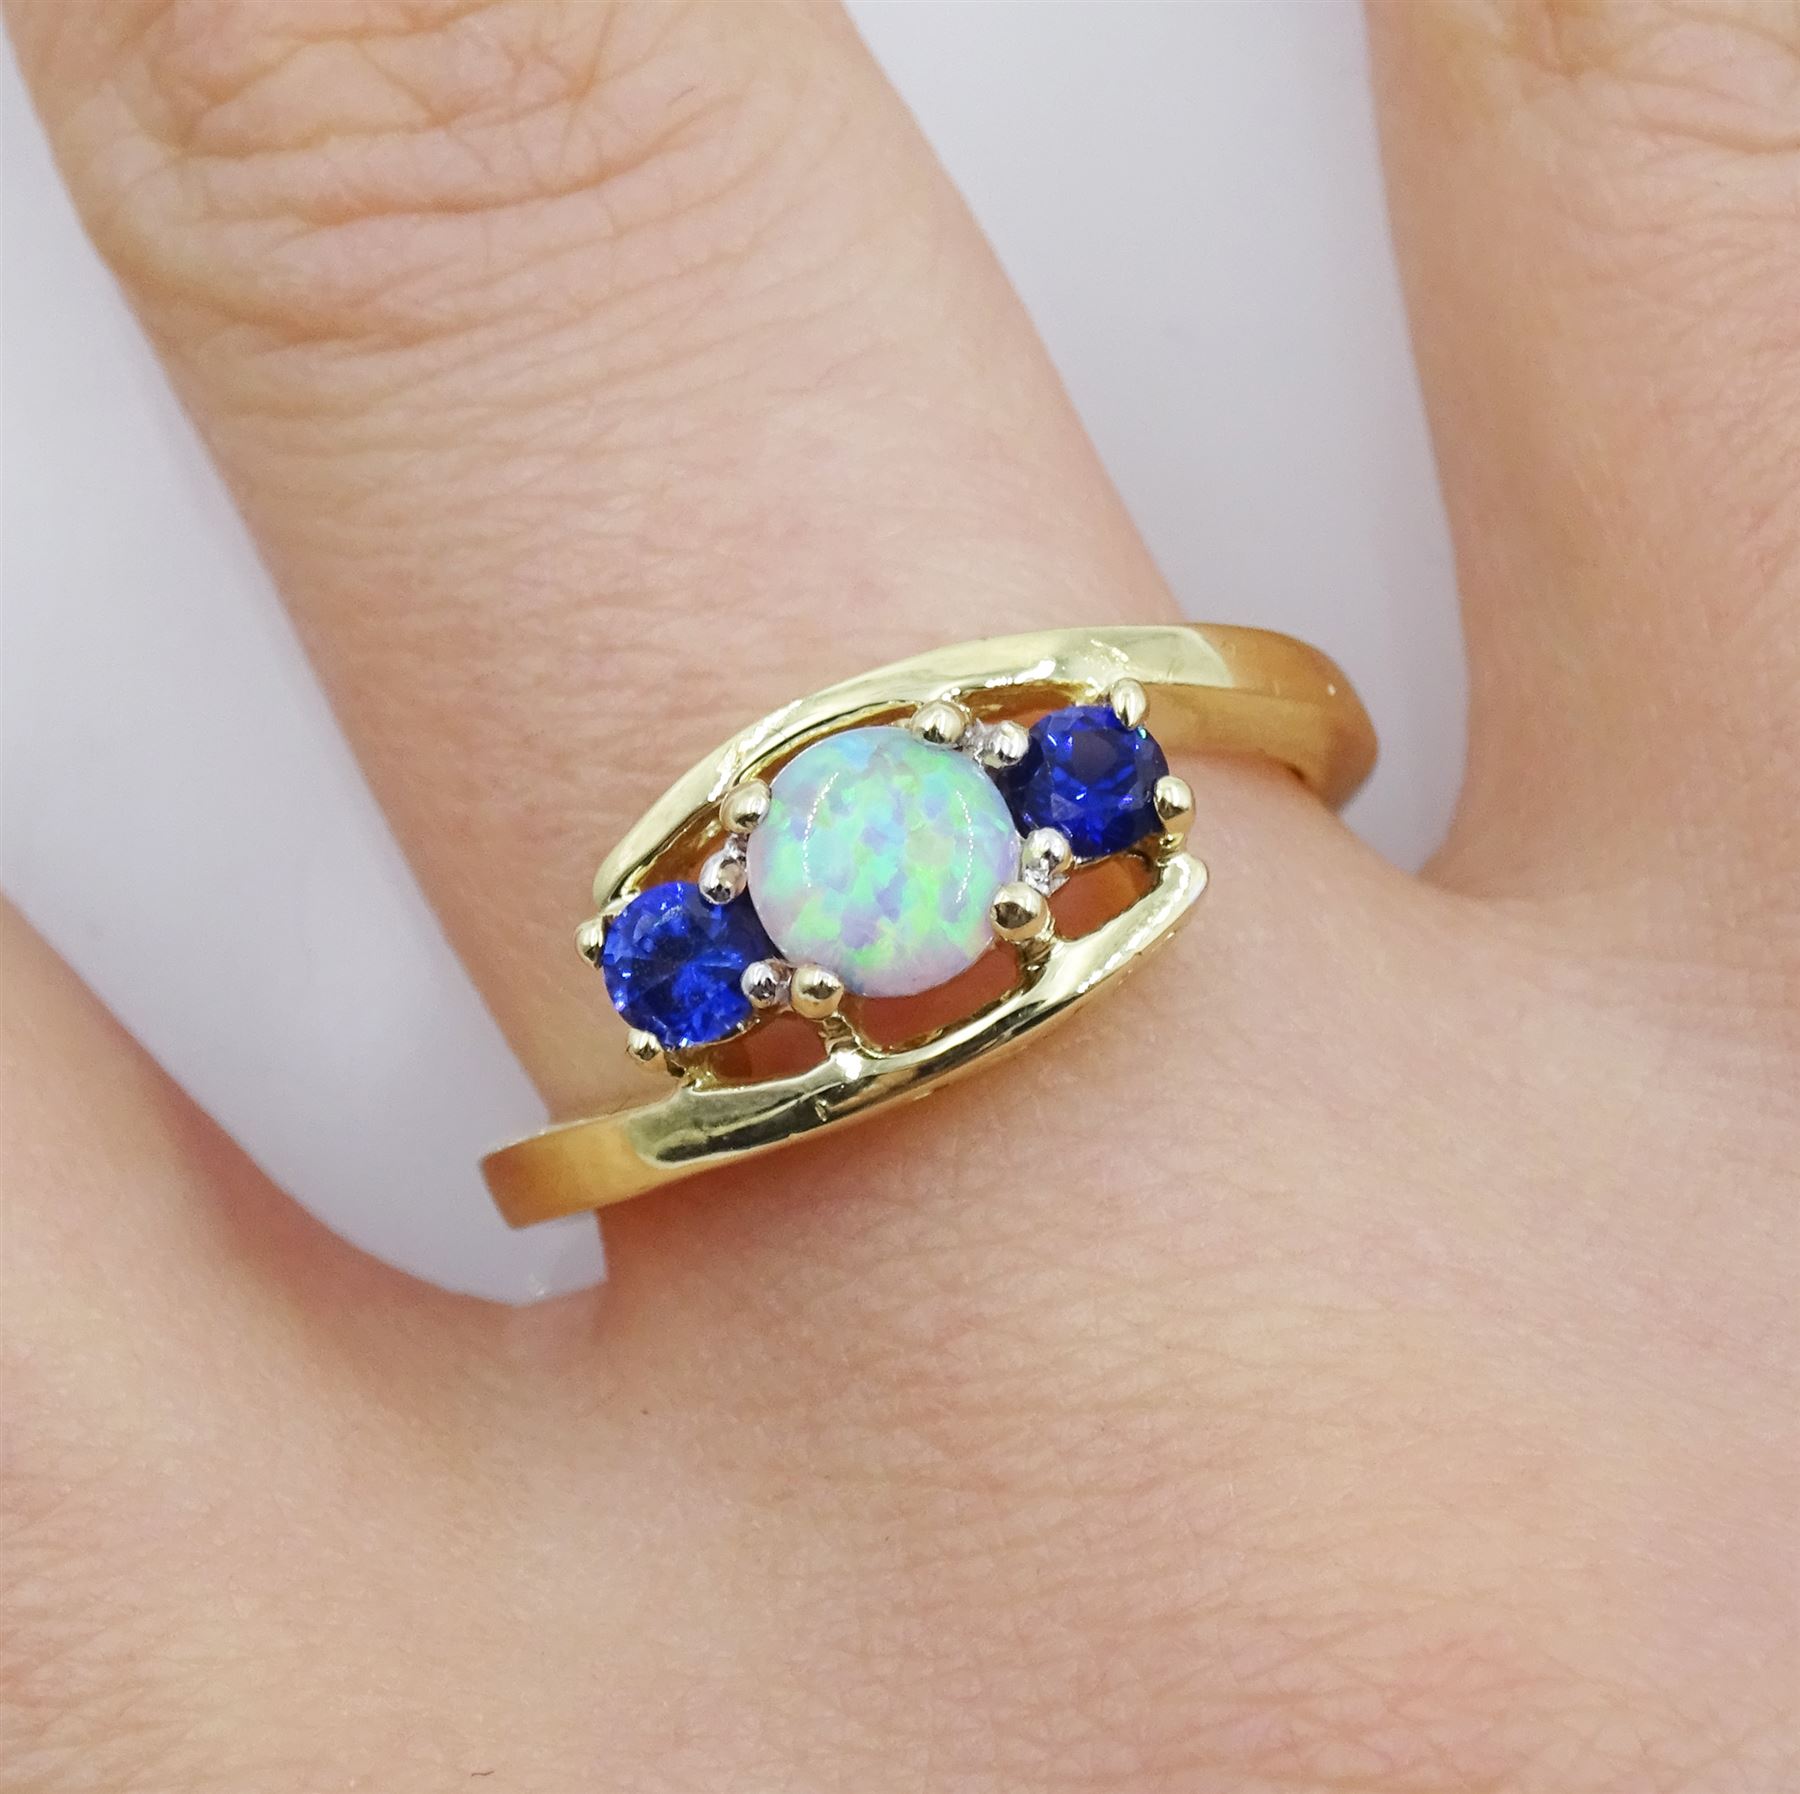 9ct gold opal and sapphire ring with 'love' gallery - Image 5 of 7